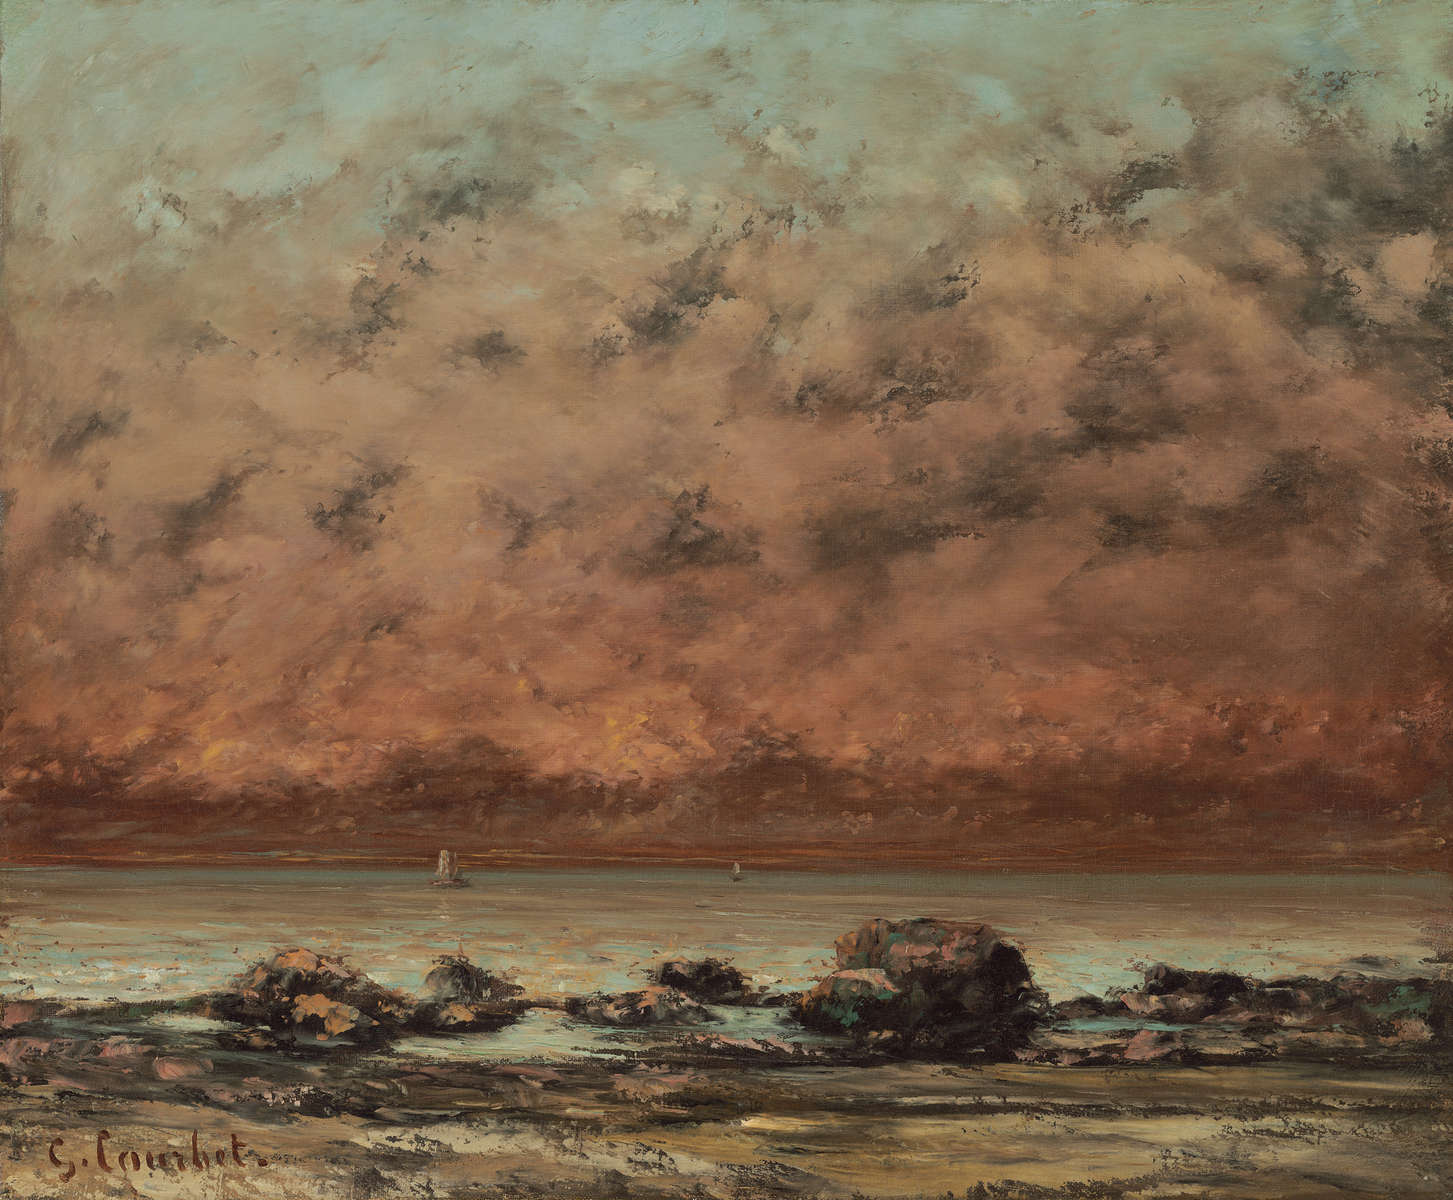 Gustave Courbet (French, 1819 - 1877 ), The Black Rocks at Trouville, 1865/1866, oil on canvas, Chester Dale Fund